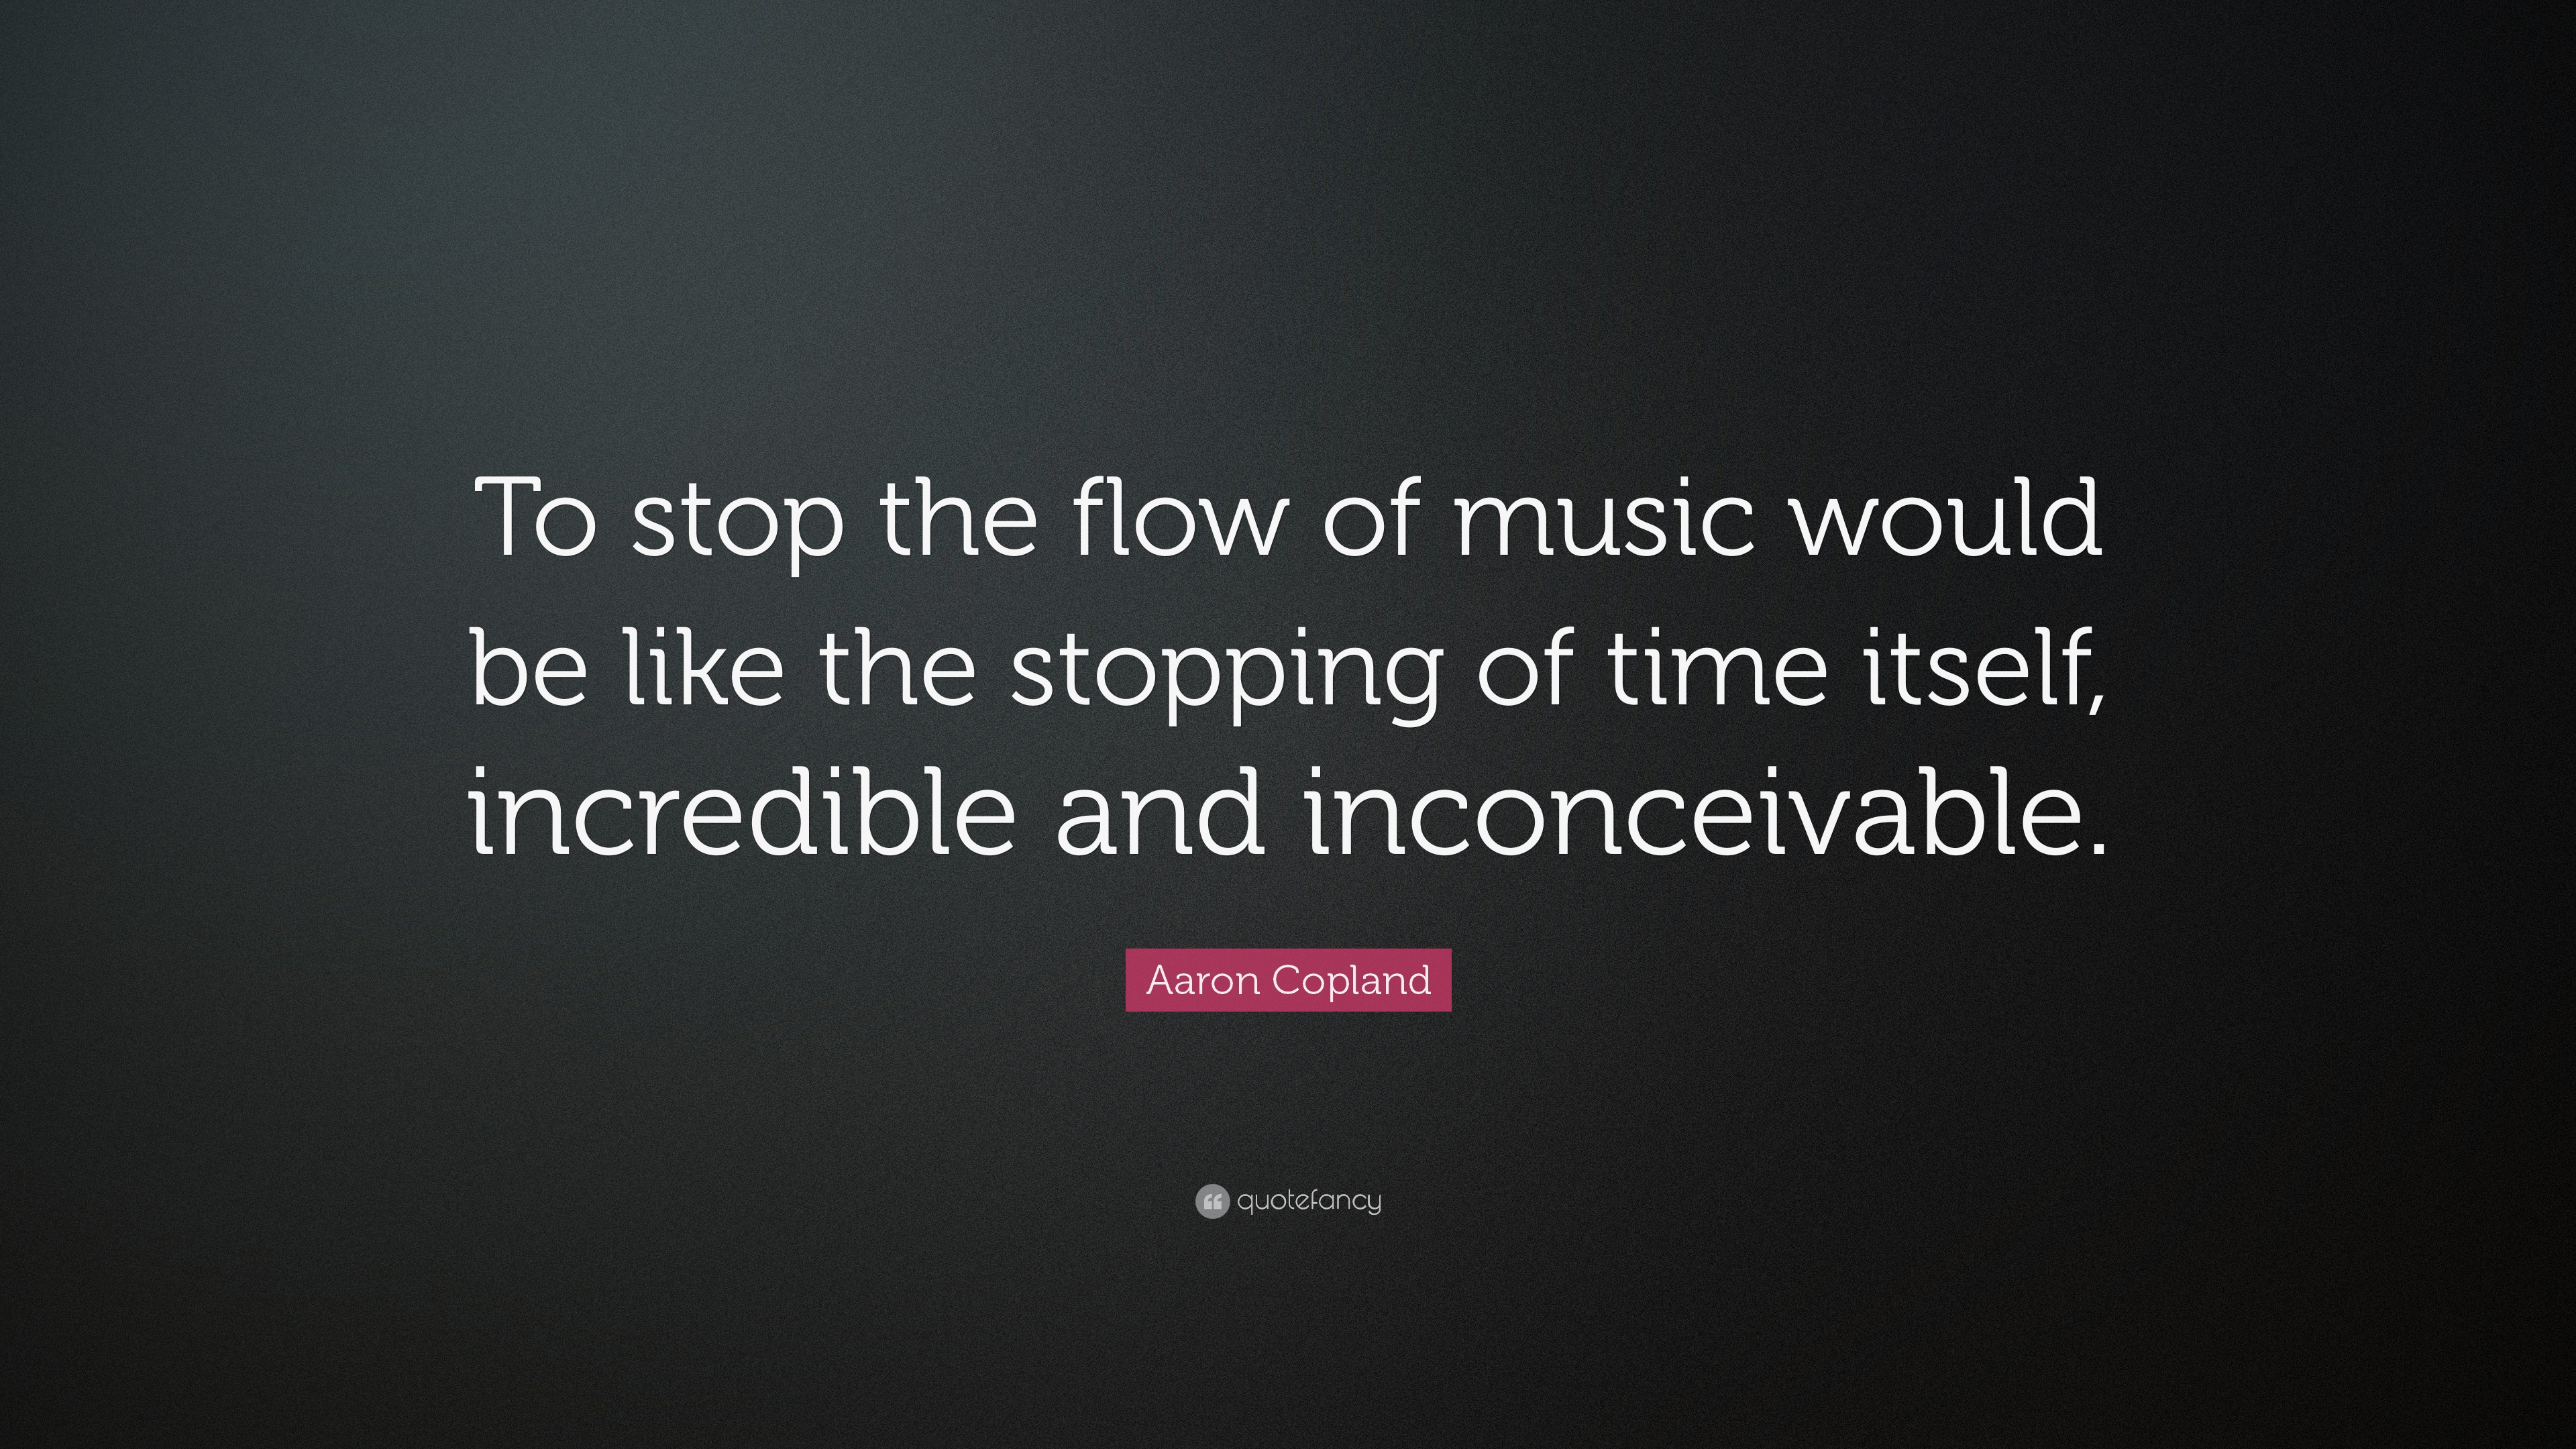 To stop the flow of music would be like the stopping of time itself, incredible and inconceivable. Aaron Copland